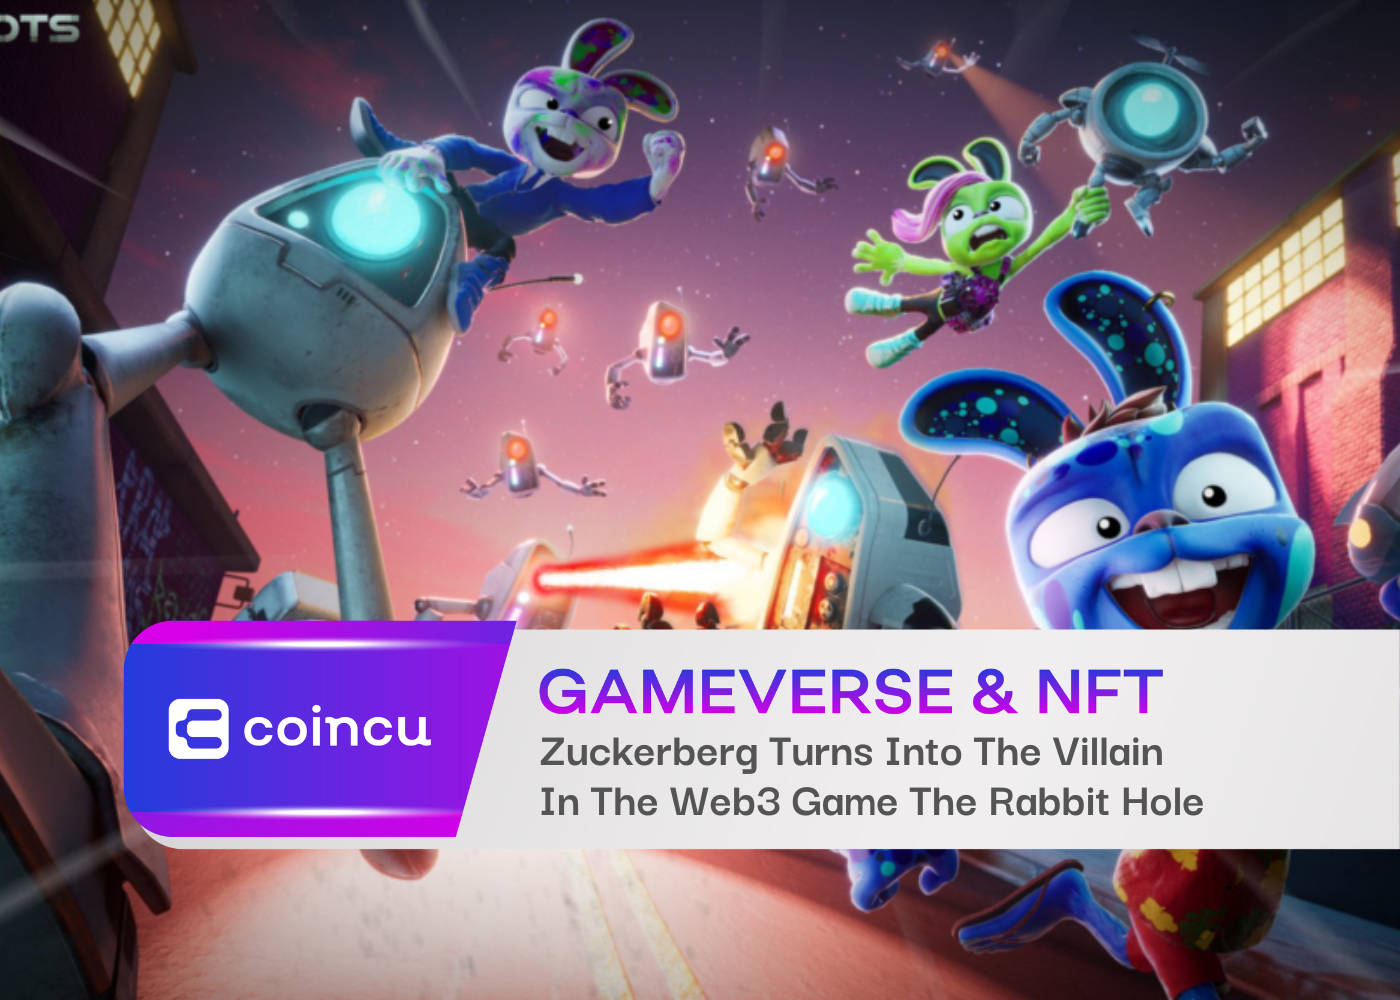 Zuckerberg Turns Into The Villain In The Web3 Game The Rabbit Hole